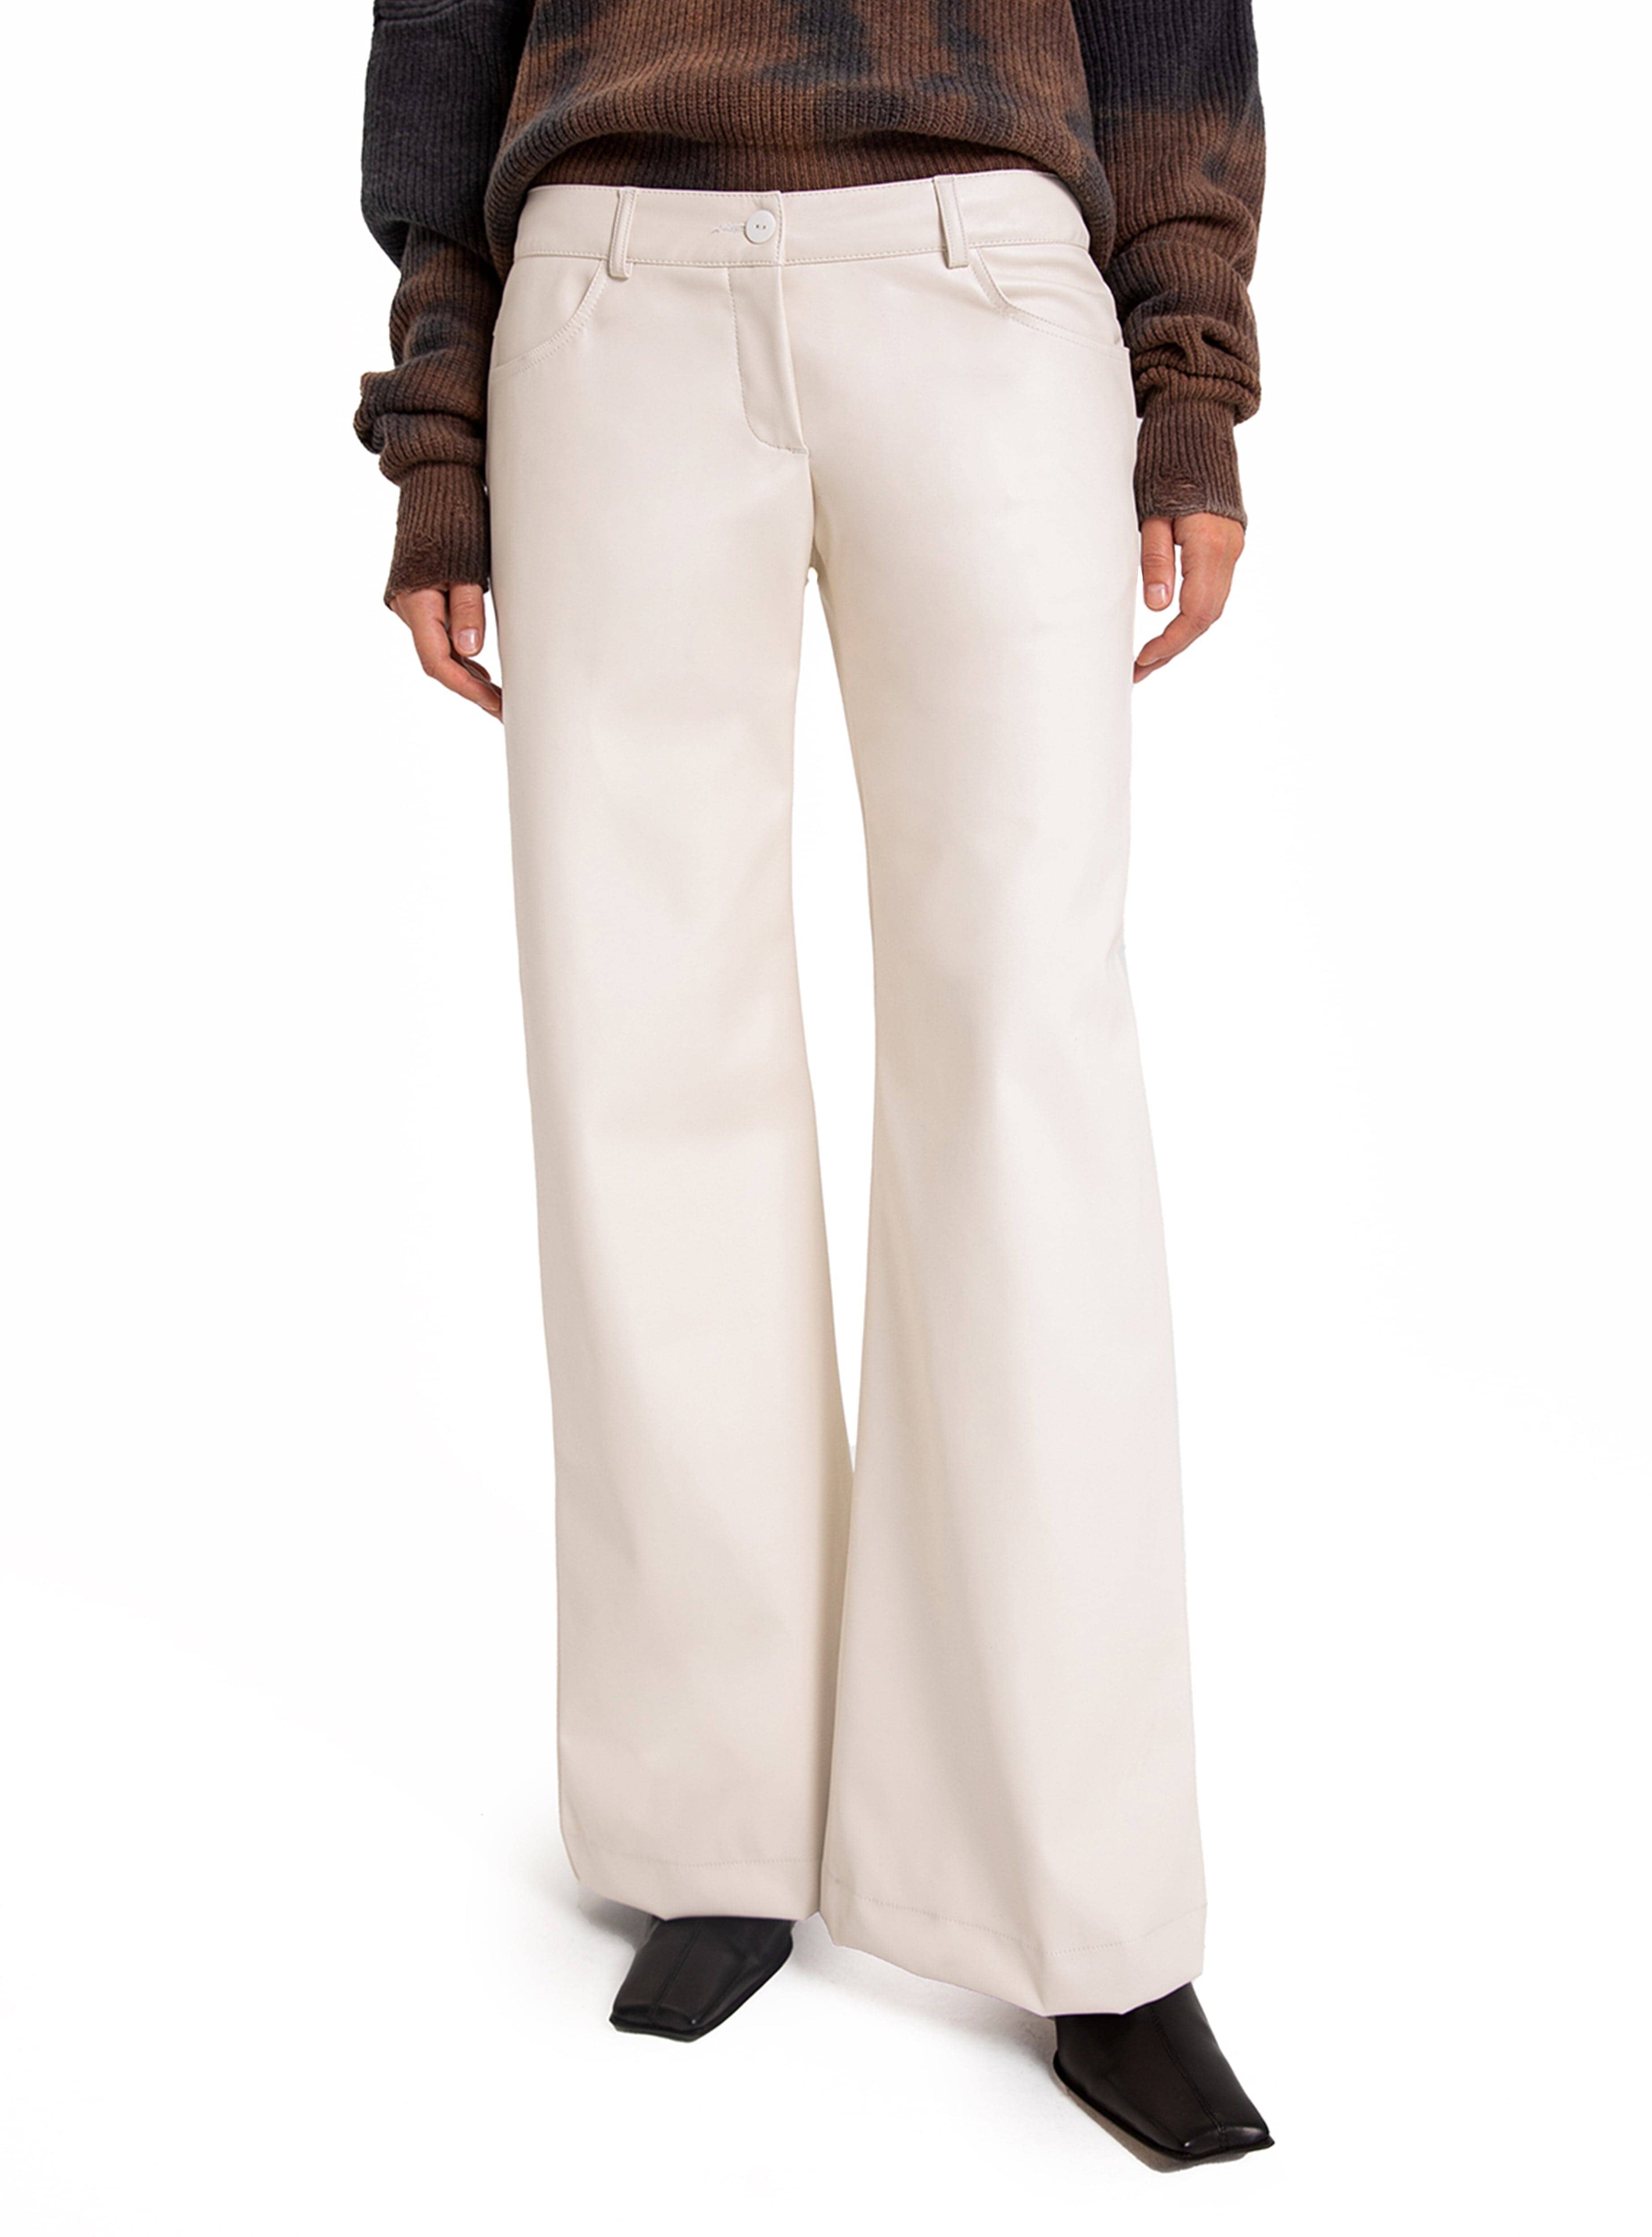 HARLOW WHITE FAUX LEATHER PANTS – LAAGAM